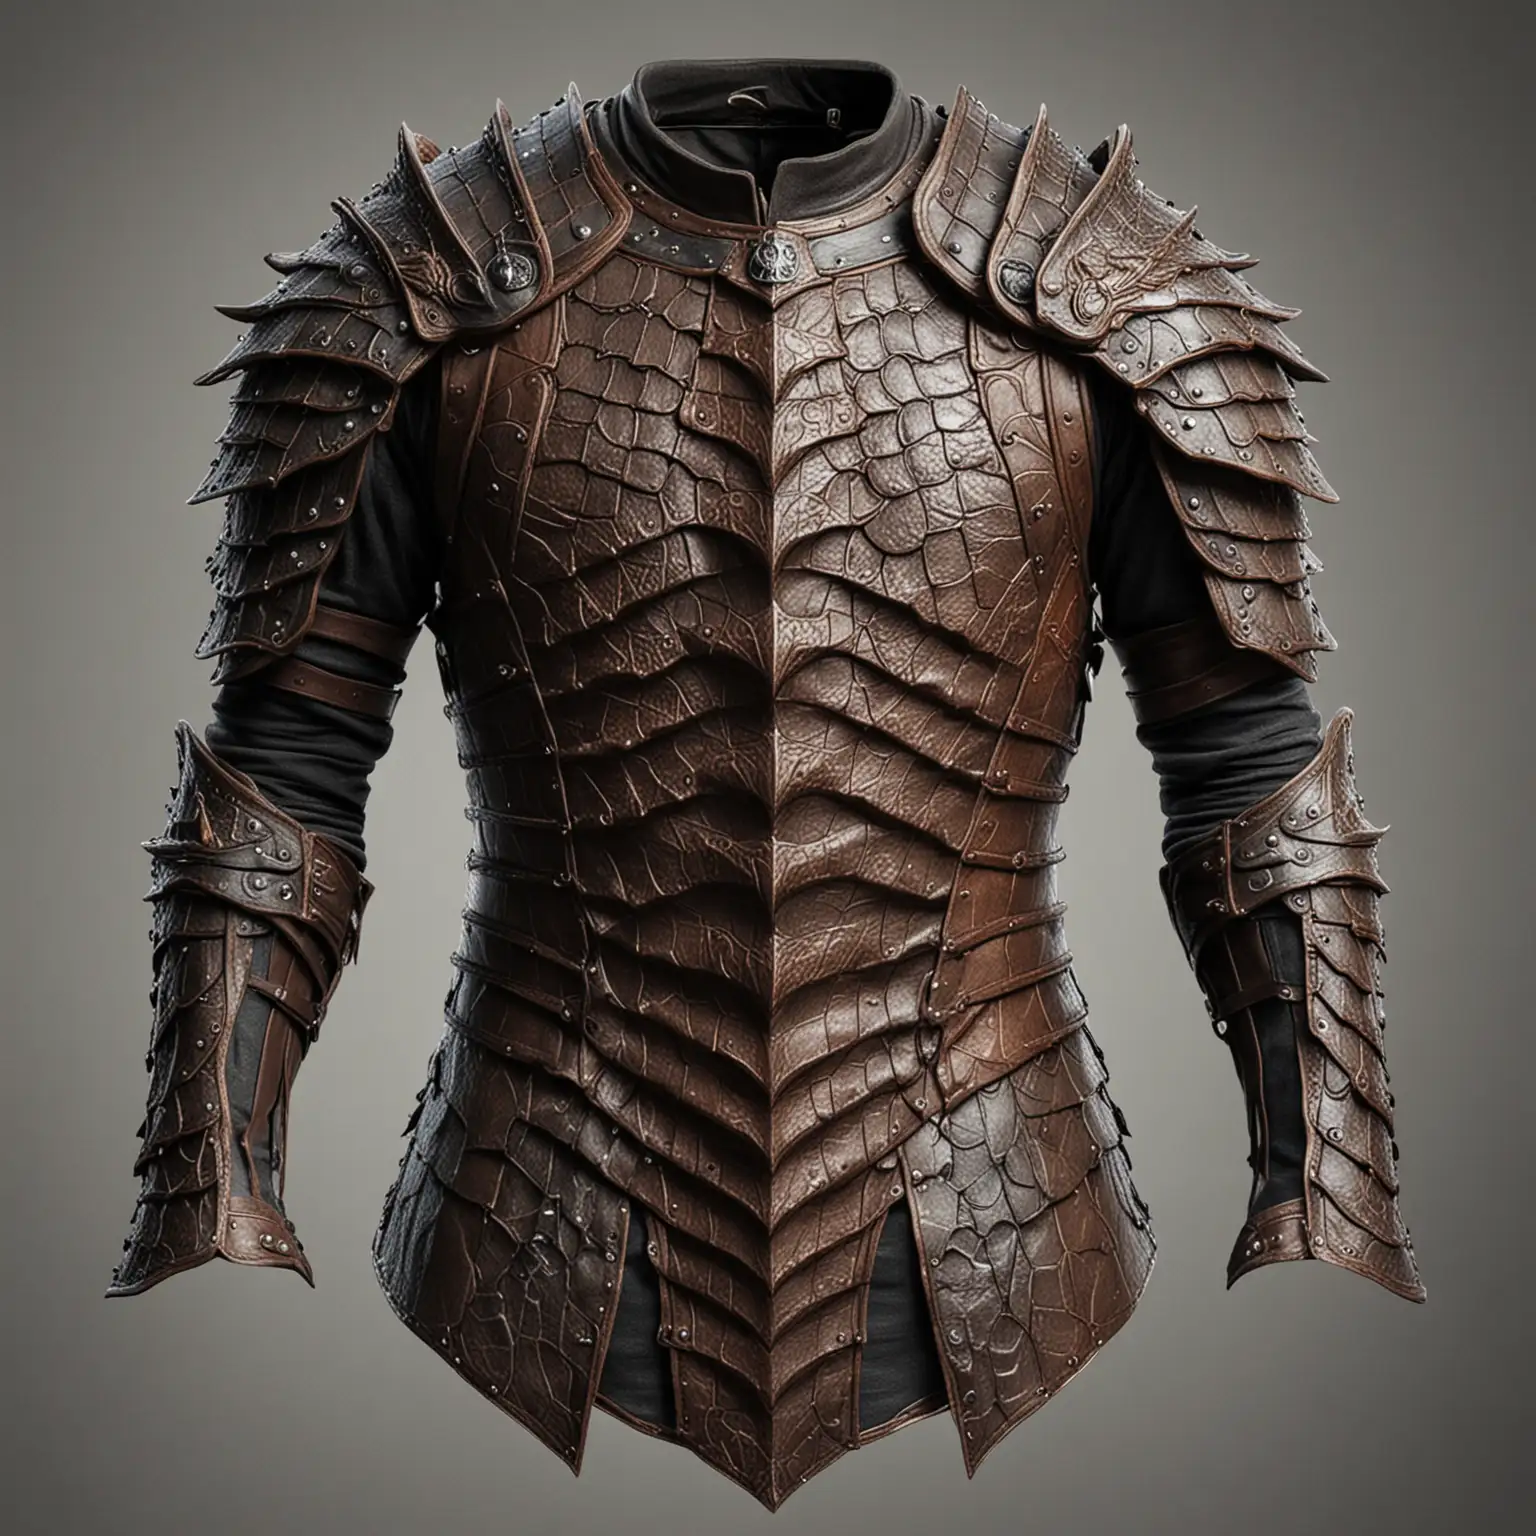 Fantasy Leather Armor with Dragon Skin Texture